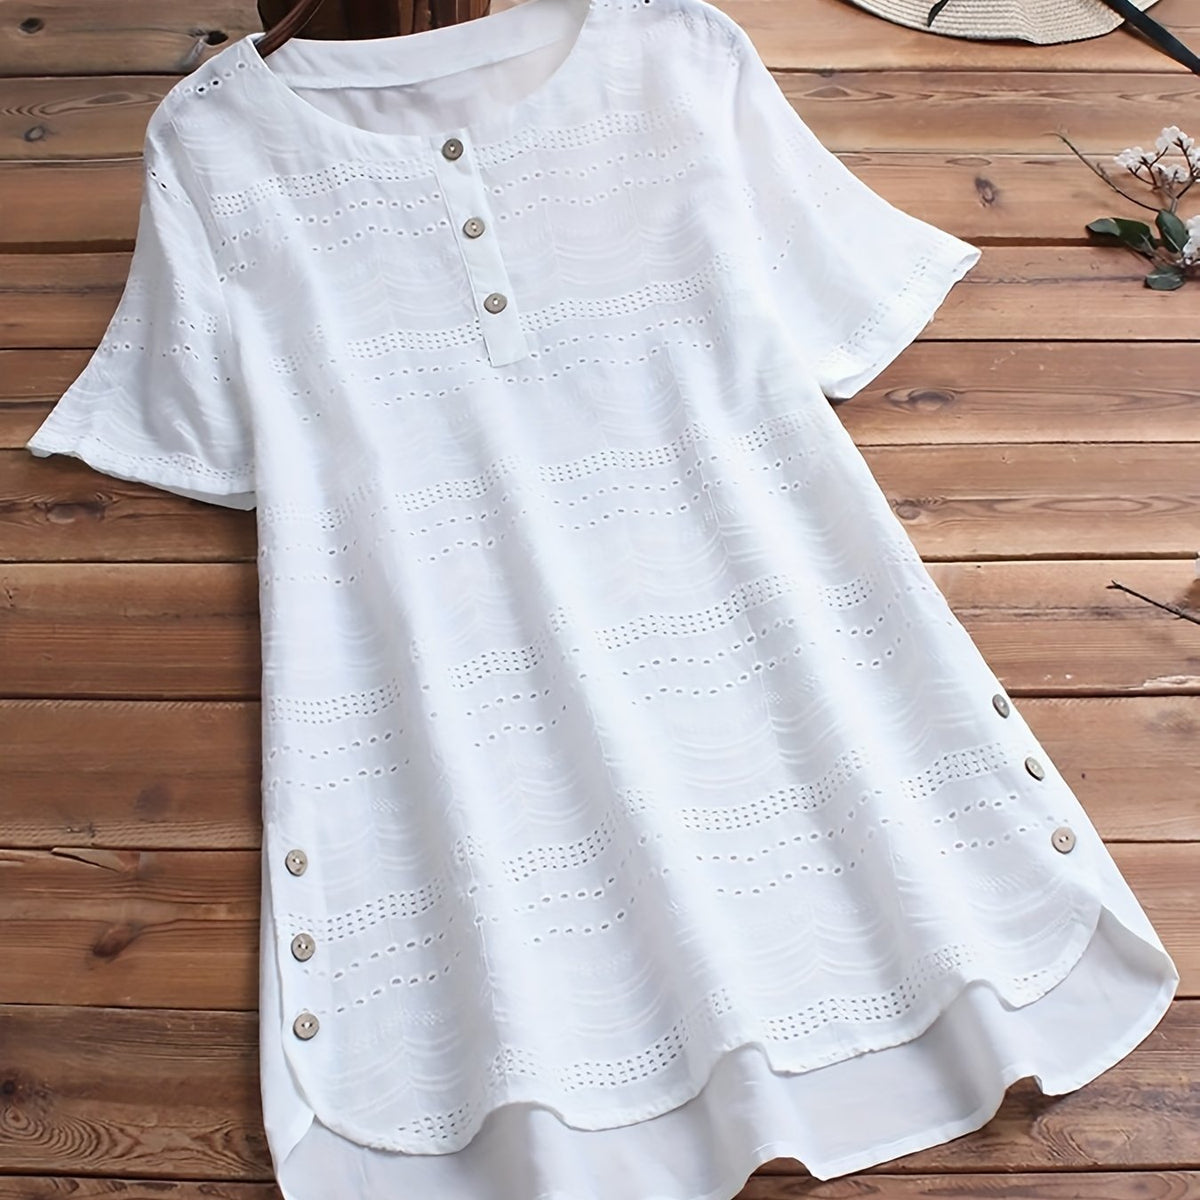 「lovevop」Eyelet Embroidered Button Decor Blouse, Casual Short Sleeve Blouse For Spring & Summer, Women's Clothing